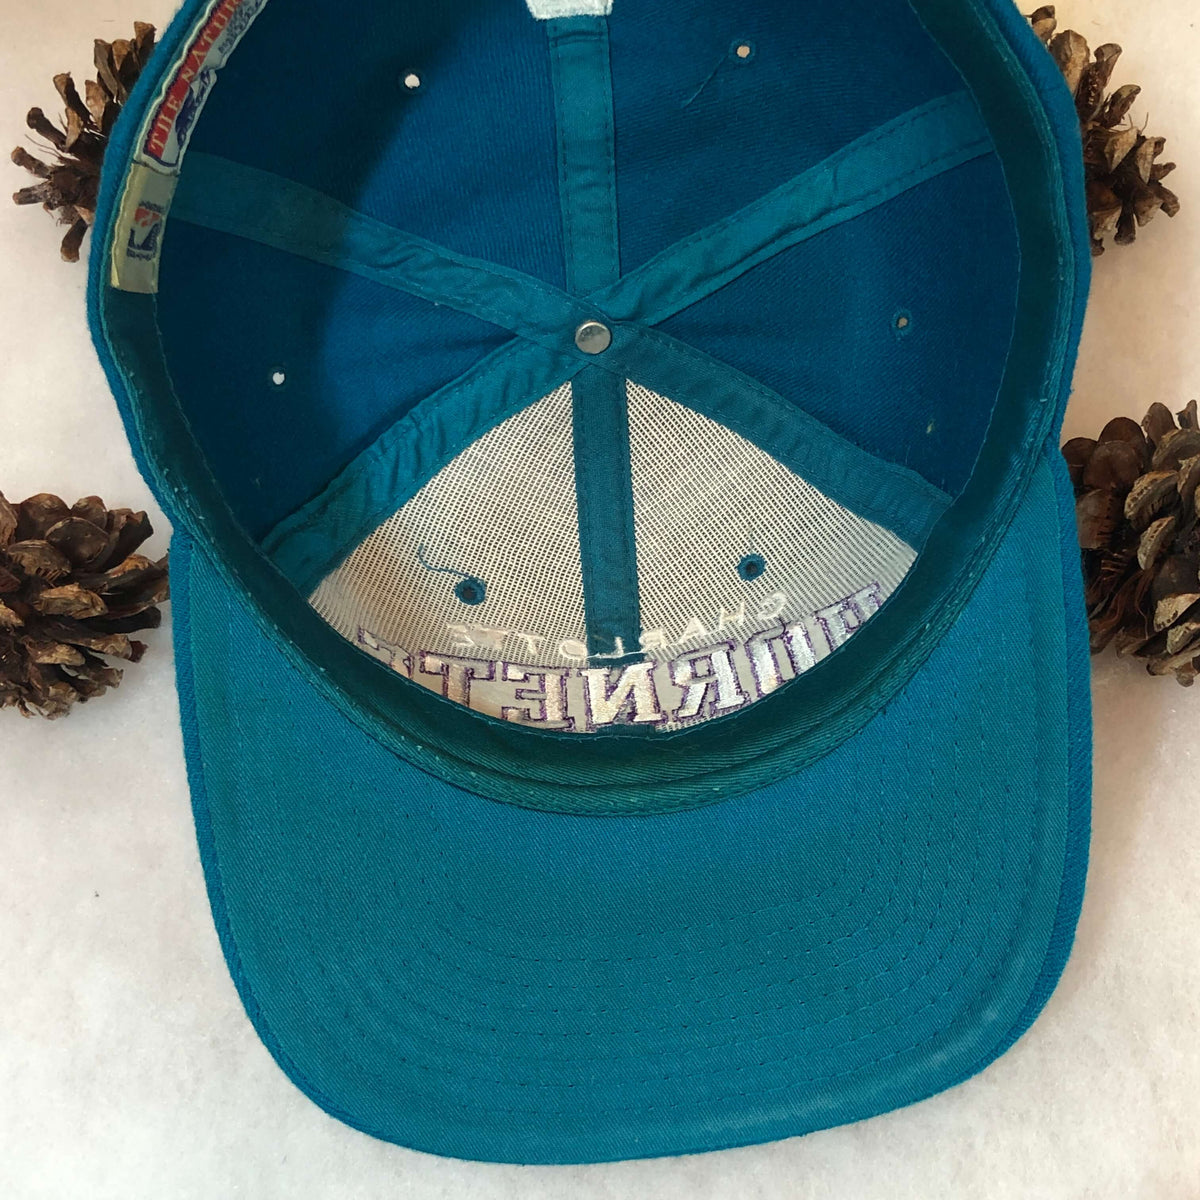 VINTAGE Hornets Arch Two Tone Starter Cap